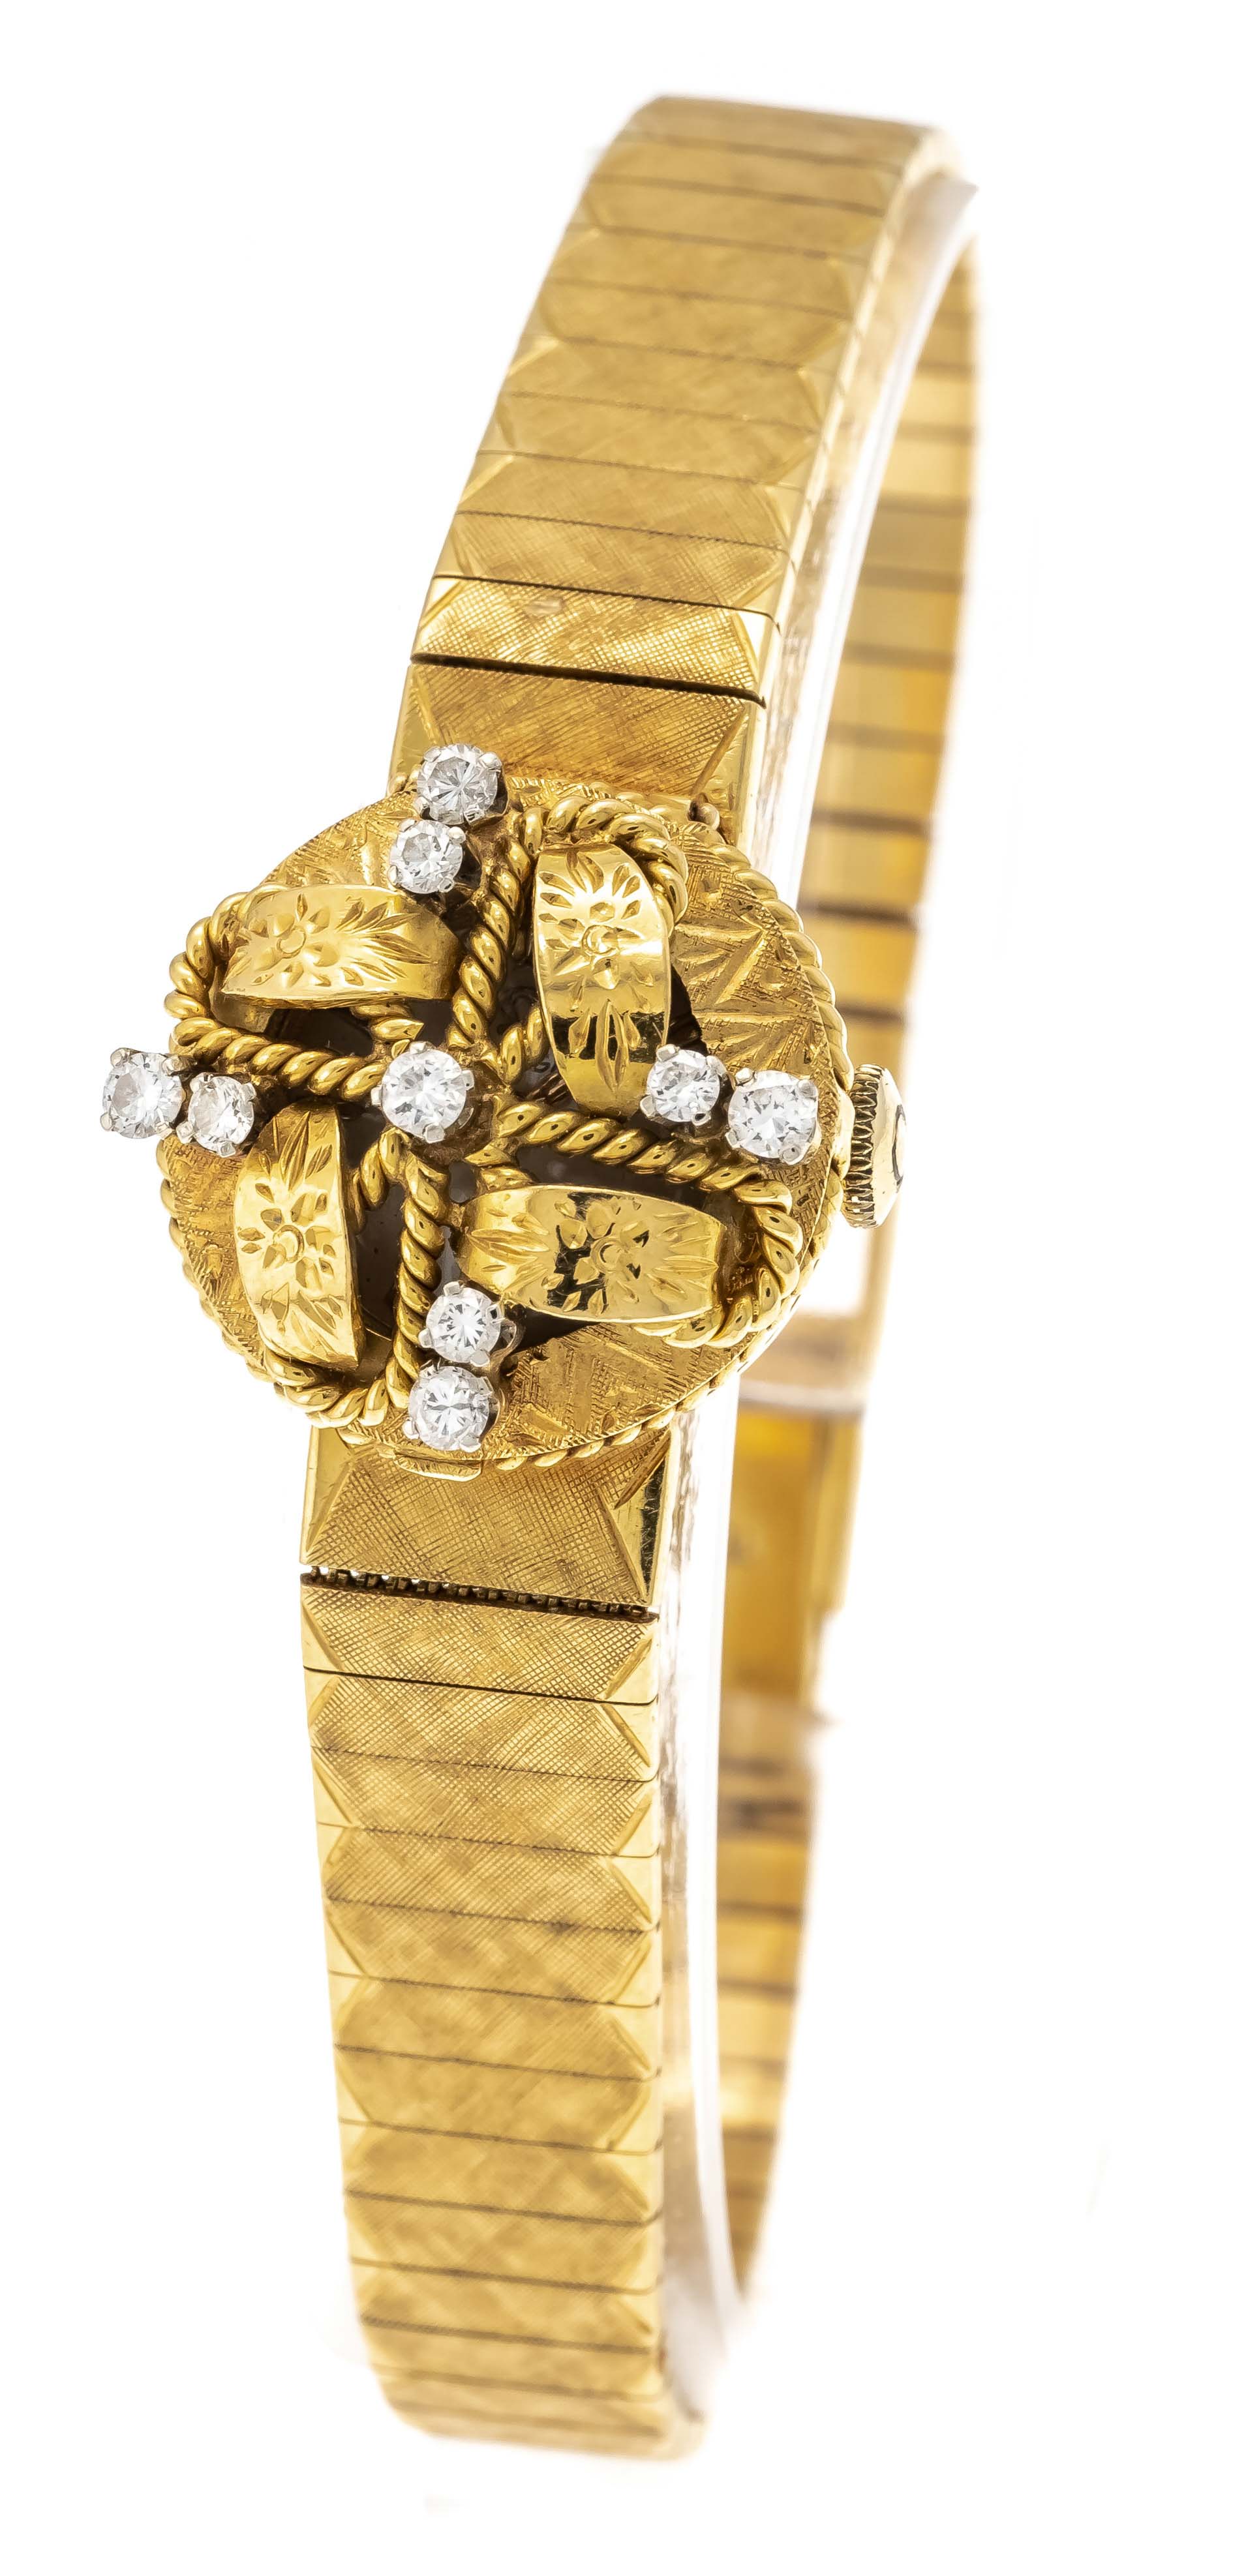 Omega ladies' watch, GG 750/000, jewellery cover with brilliant-cut diamonds in a diamond-setting - Image 5 of 9